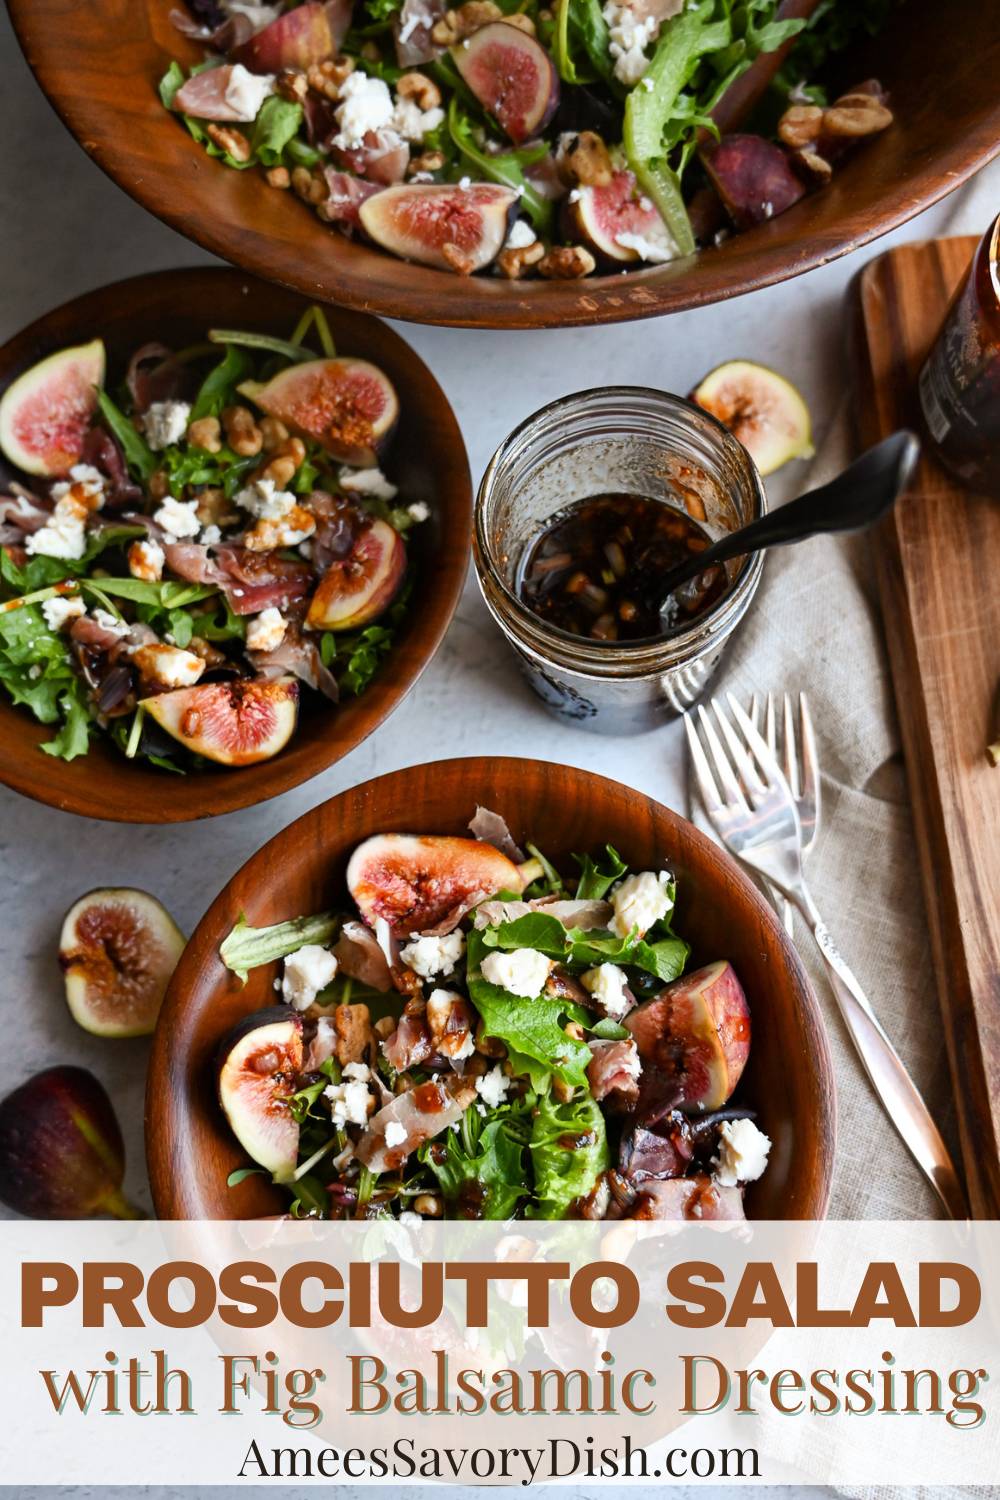 A hearty and delicious dinner salad made with prosciutto ham, greens, gorgonzola, walnuts, and fresh figs. via @Ameessavorydish